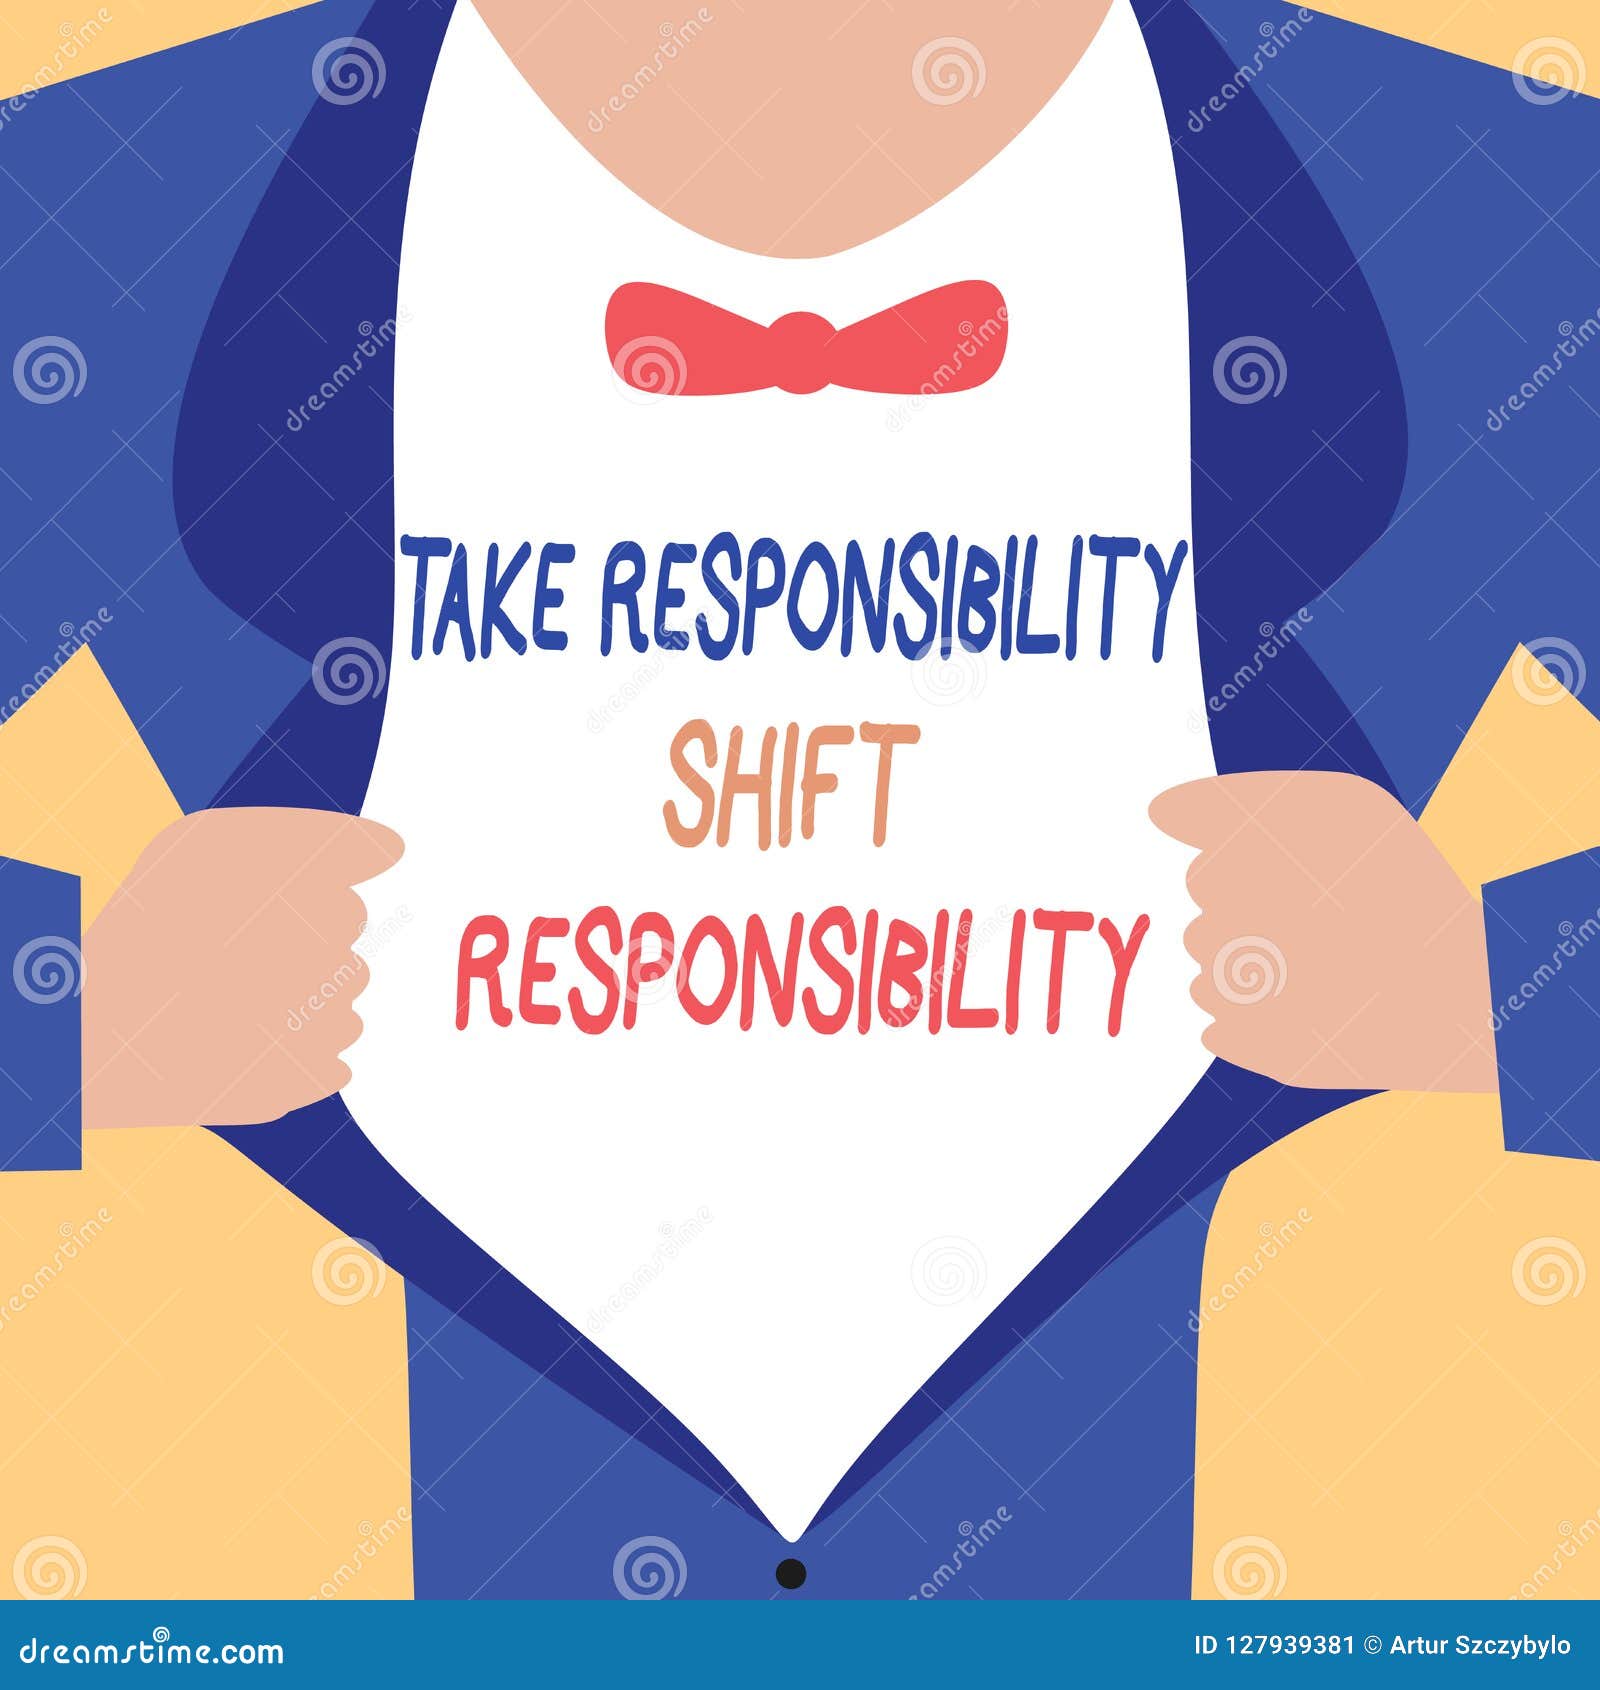 assignment of responsibility meaning